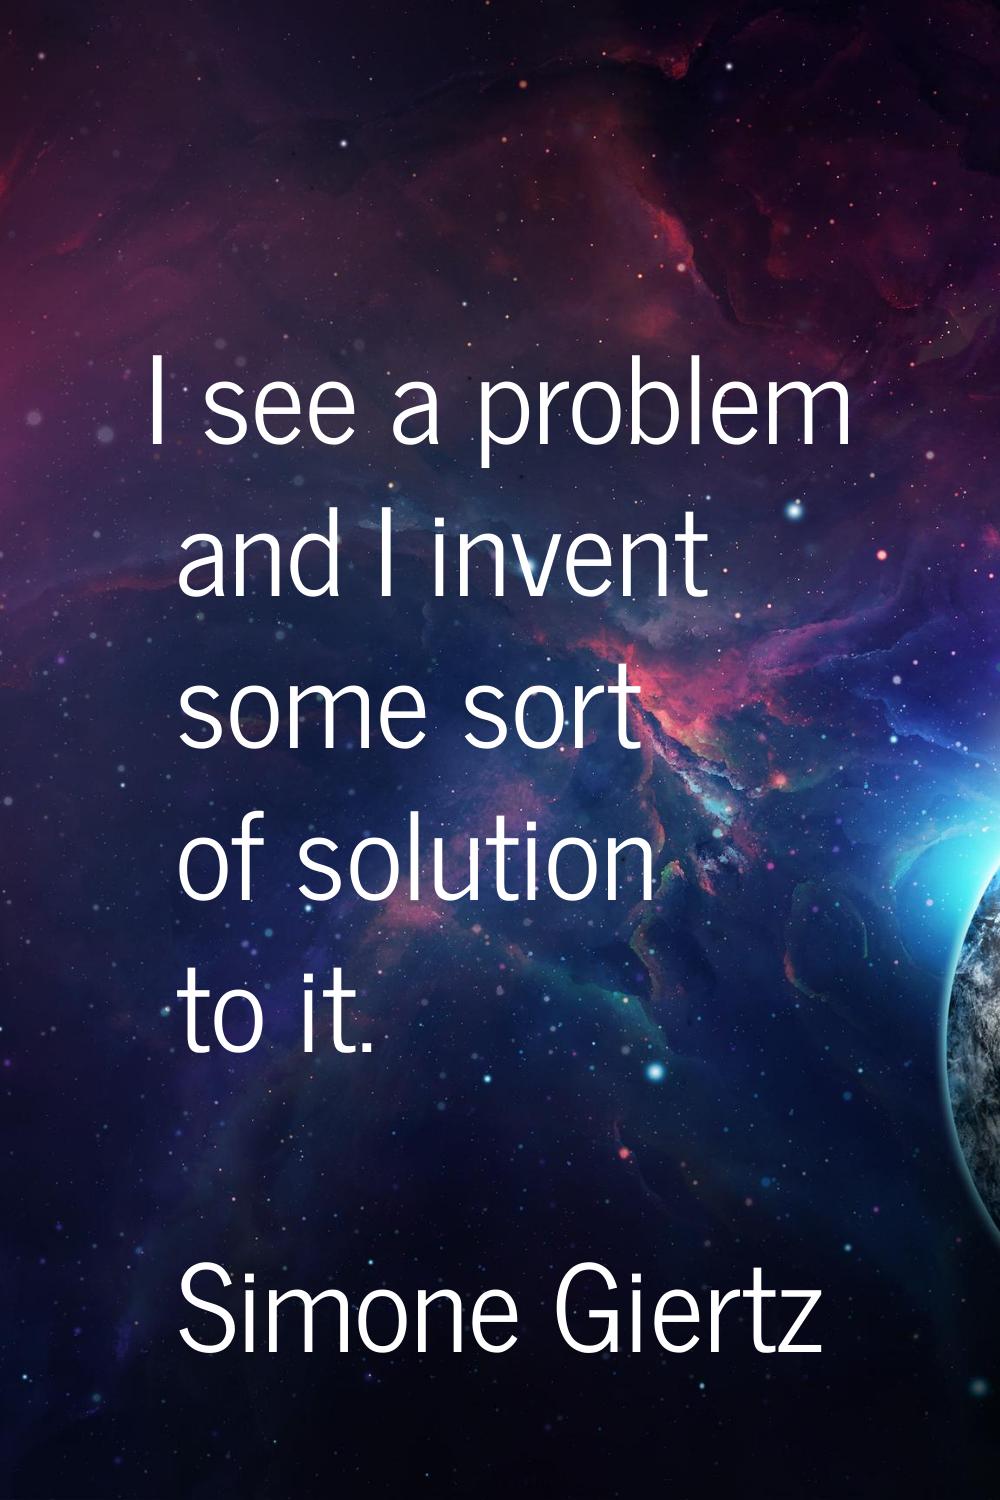 I see a problem and I invent some sort of solution to it.